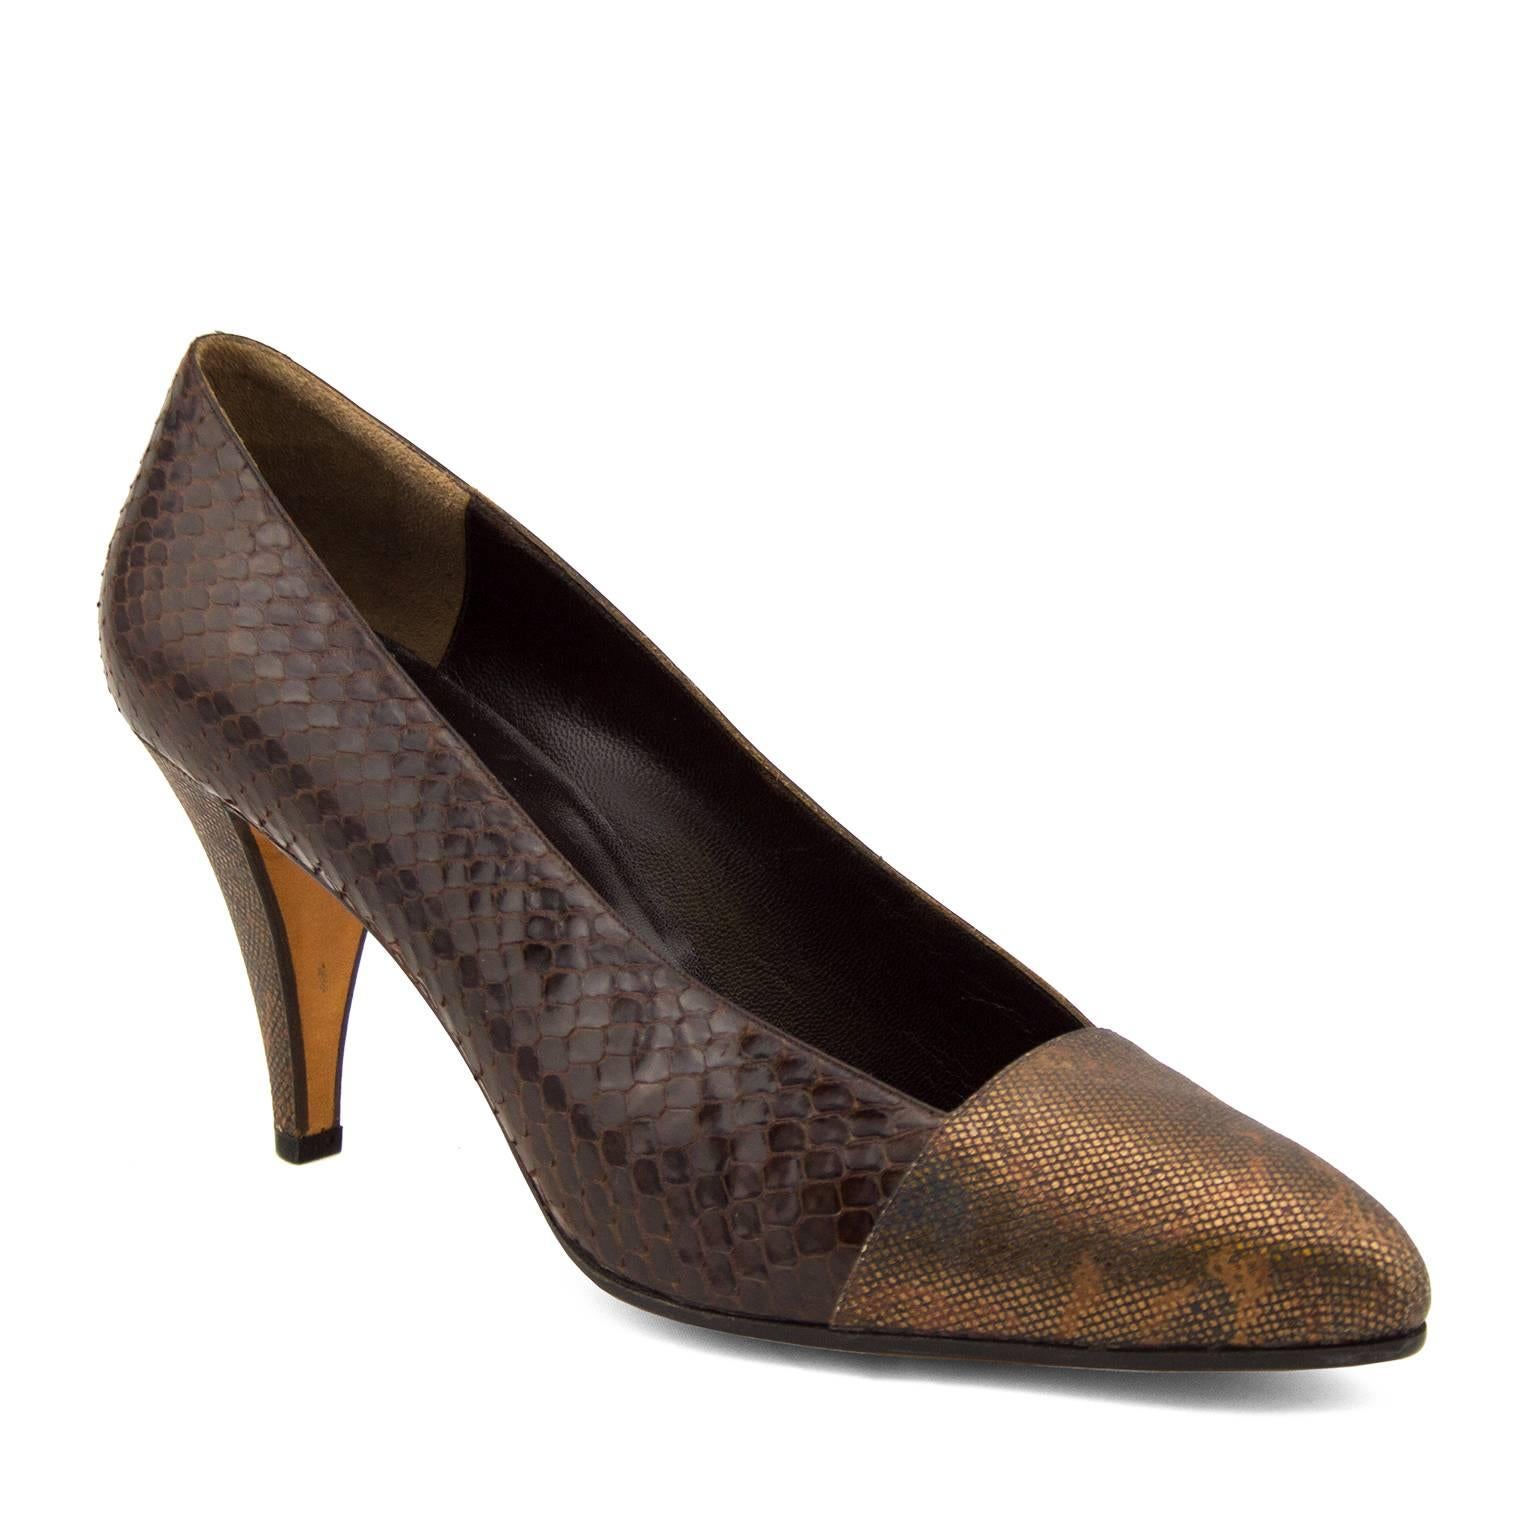 1980s bronze and brown mixed material pump by Andrea Pfister. The outer side of the shoe is dark brown while the inner side is supple brown leather. The toe and heel are covered in a bronze texturized leather. The soles are in pristine condition and